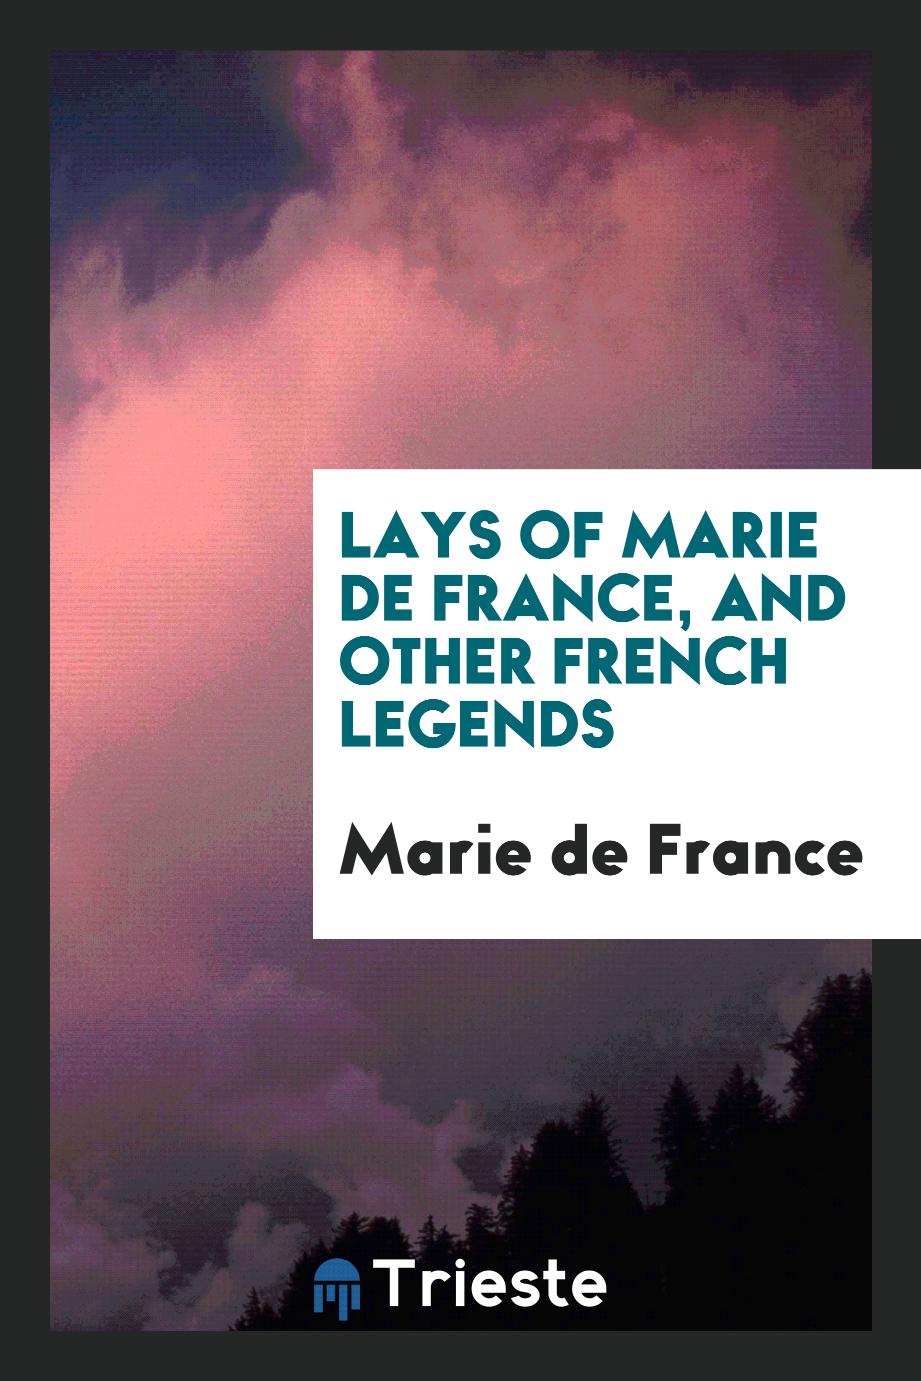 Lays of Marie de France, and other French legends